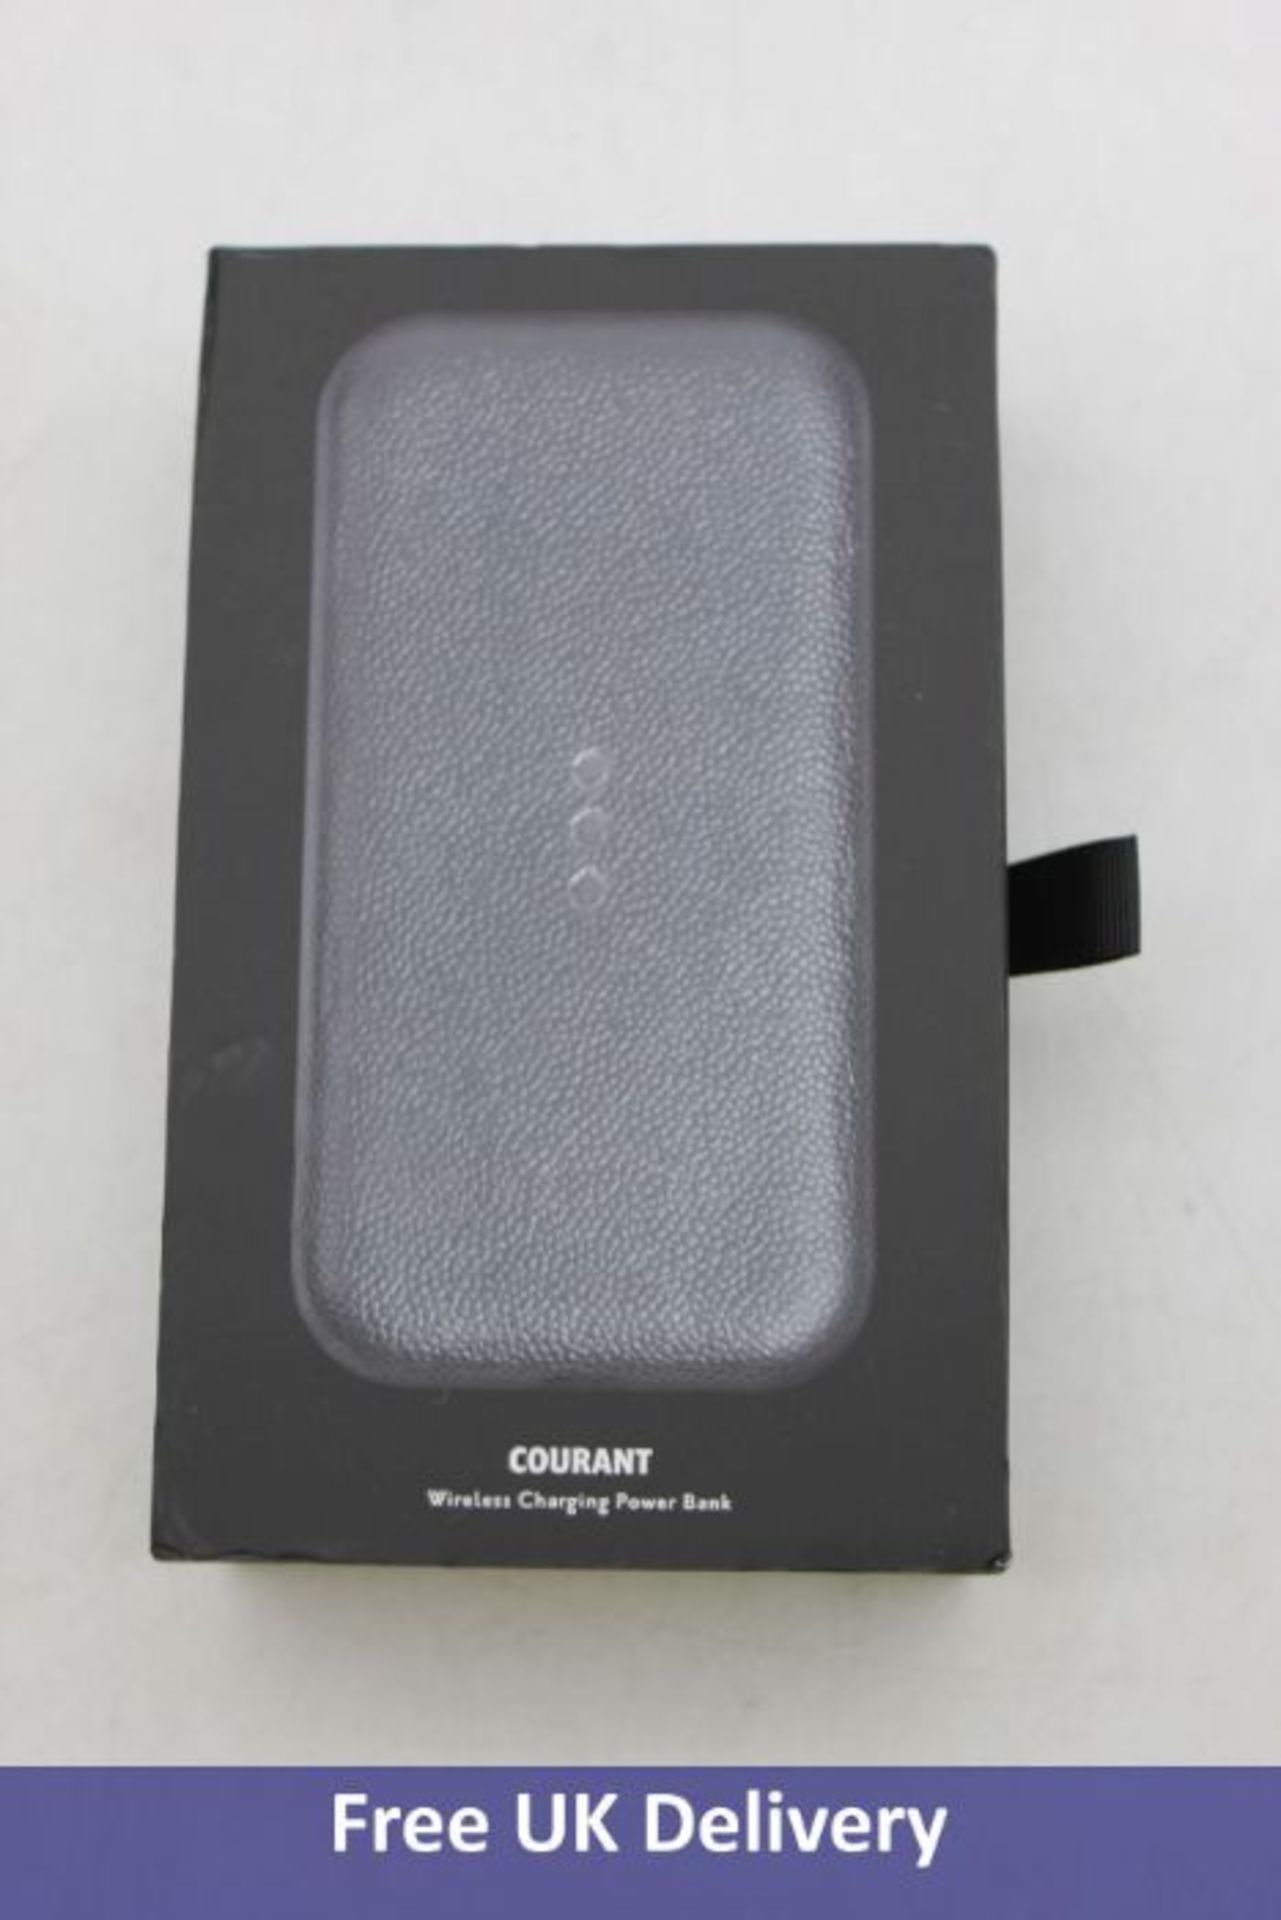 Courant Carry Power Bank Wireless Charger, Ash